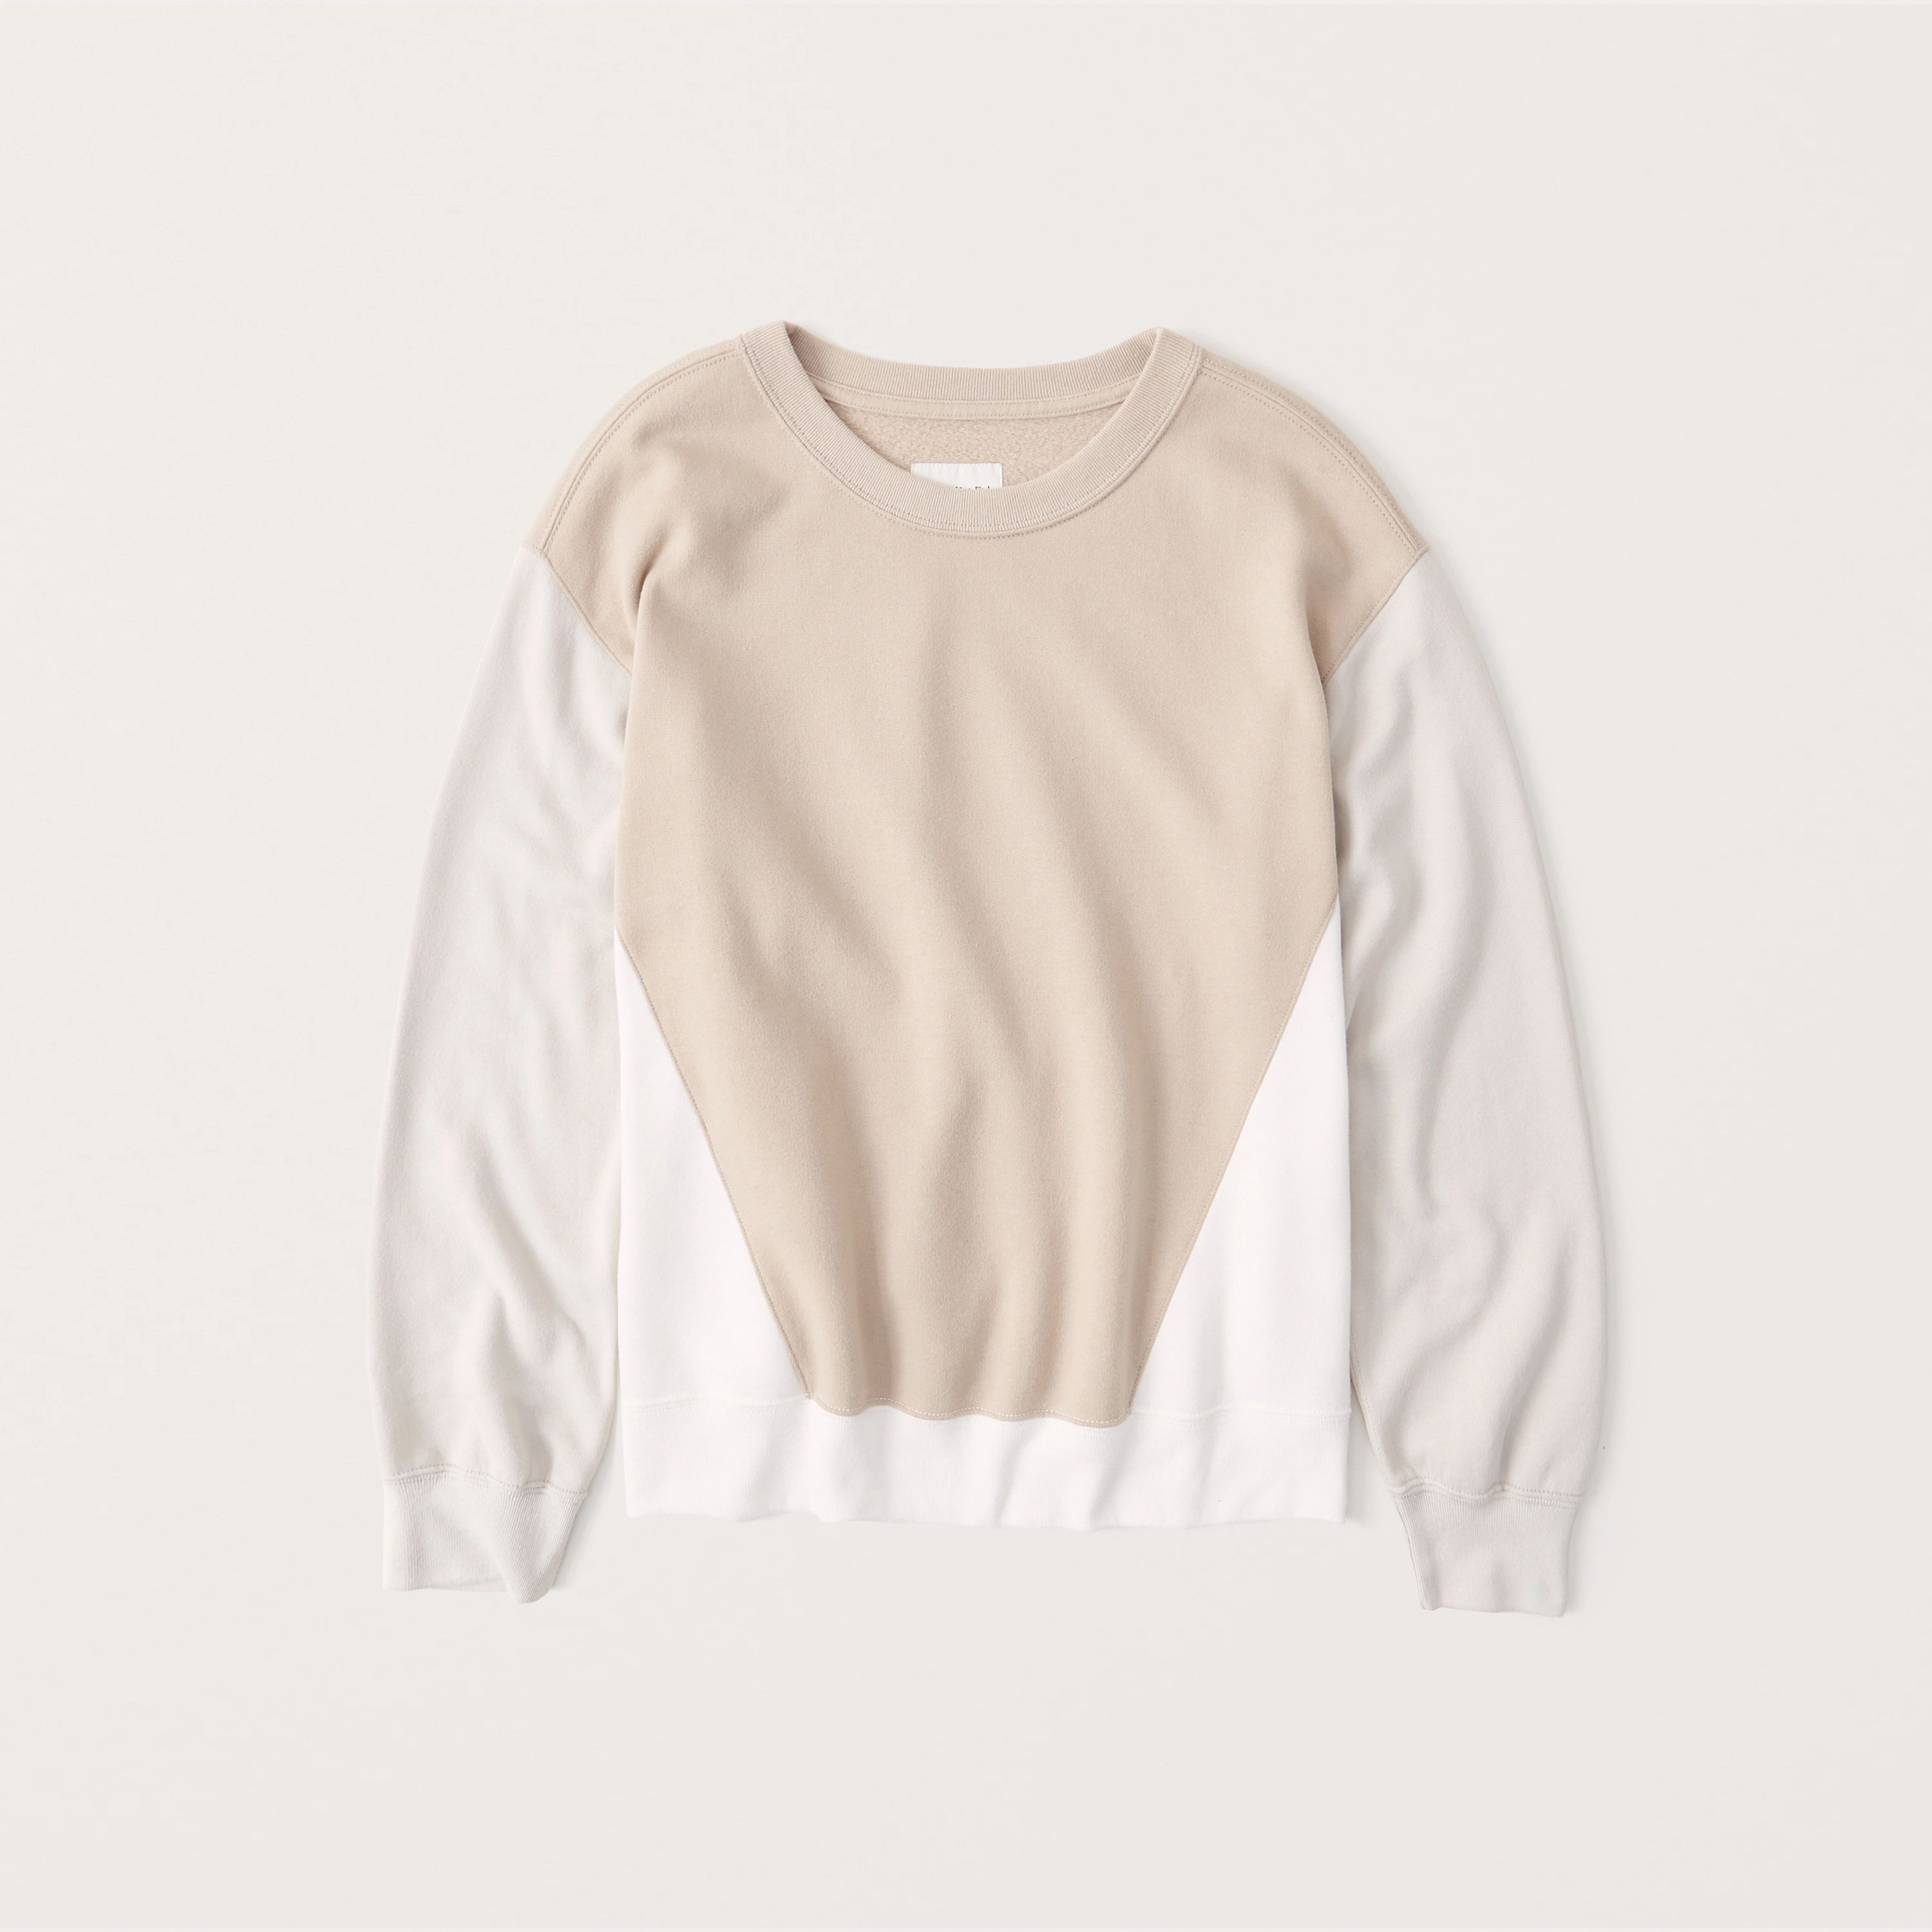 Women's Colorblock Sweatshirt | Women's 40-60% Off Throughout the Store | Abercrombie.com | Abercrombie & Fitch (US)